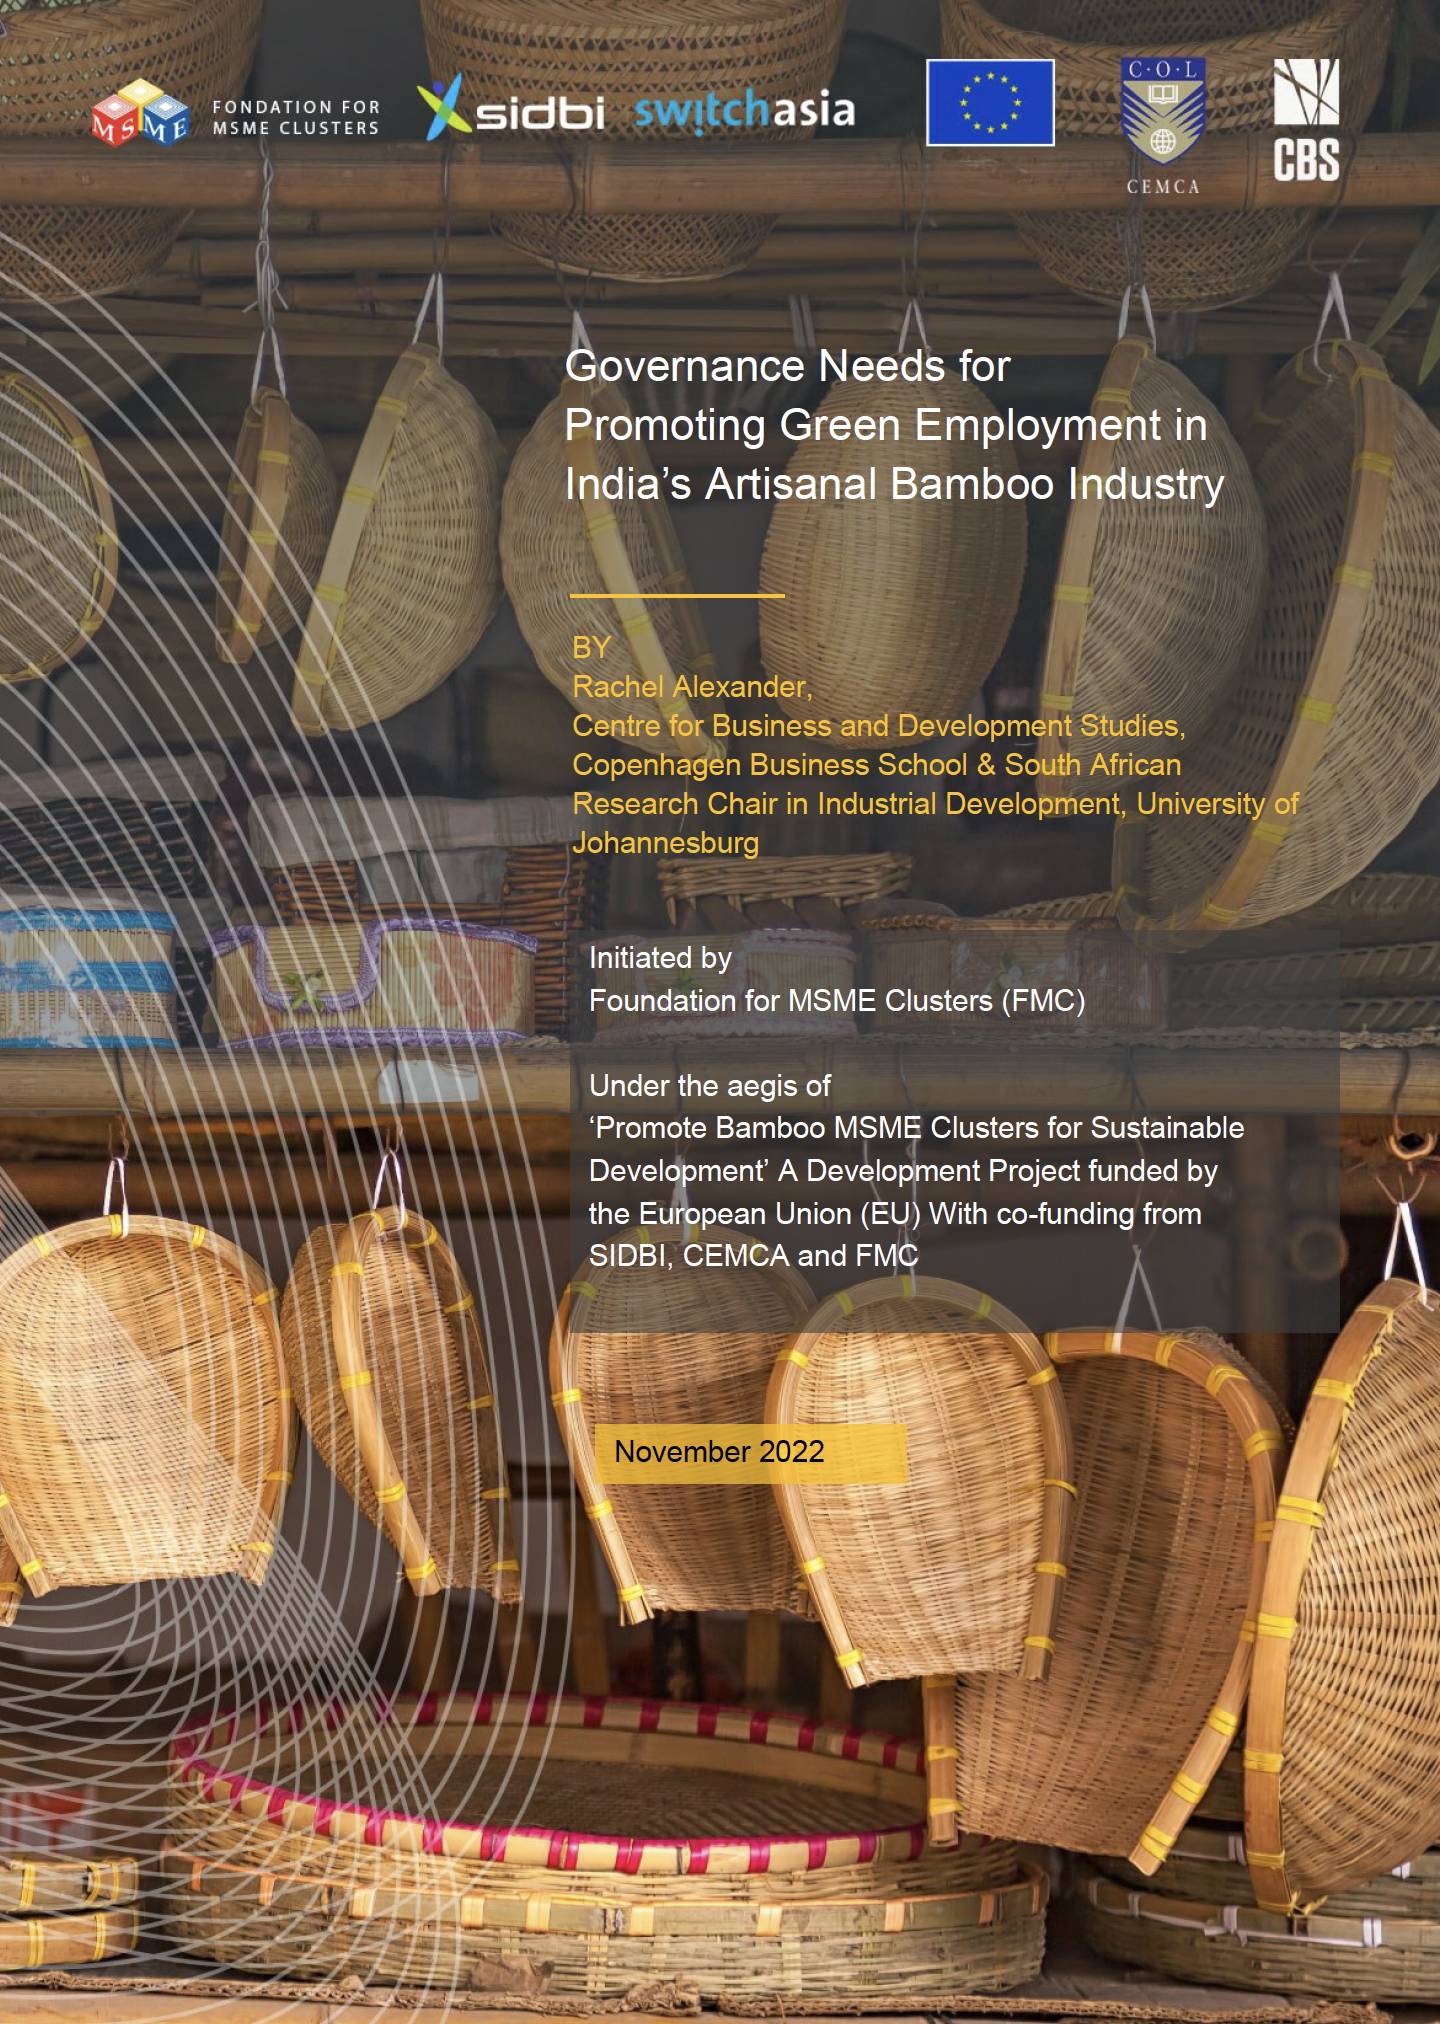 Governance needs for promoting green employment in India's artisanal bamboo industry